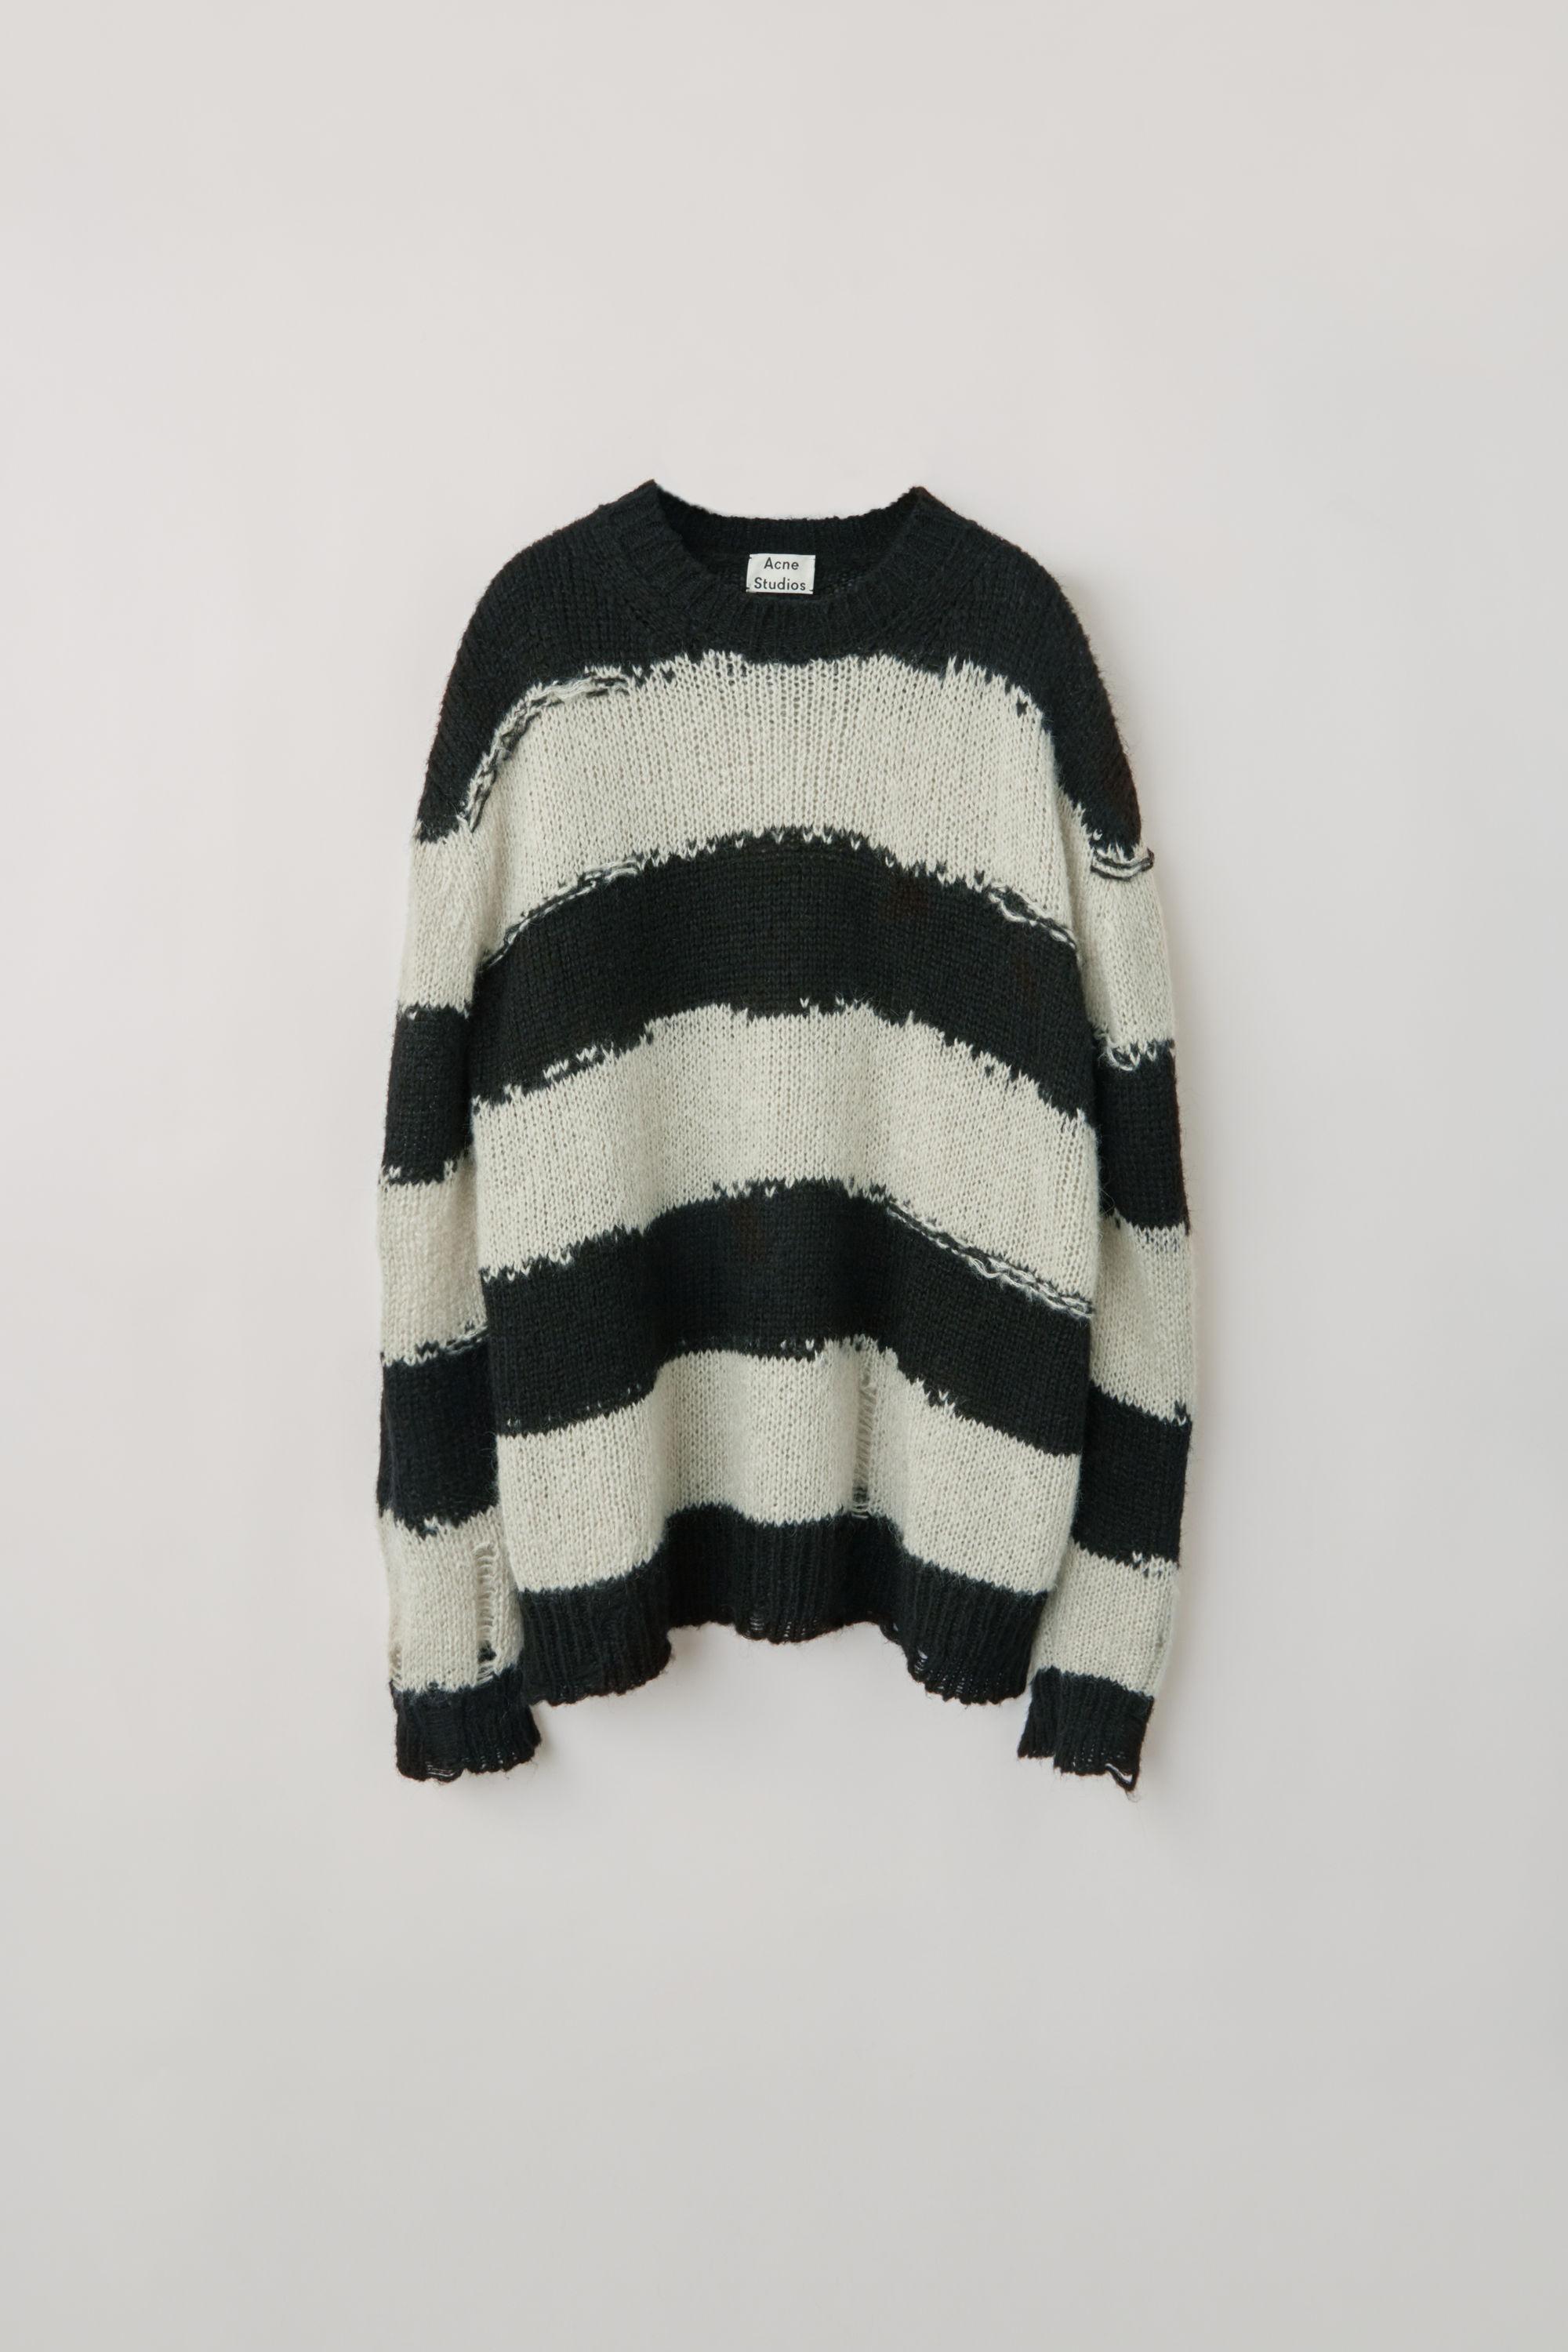 Acne Studios Synthetic Fn-wn-knit000151 Black/grey Distressed Striped  Sweater - Lyst